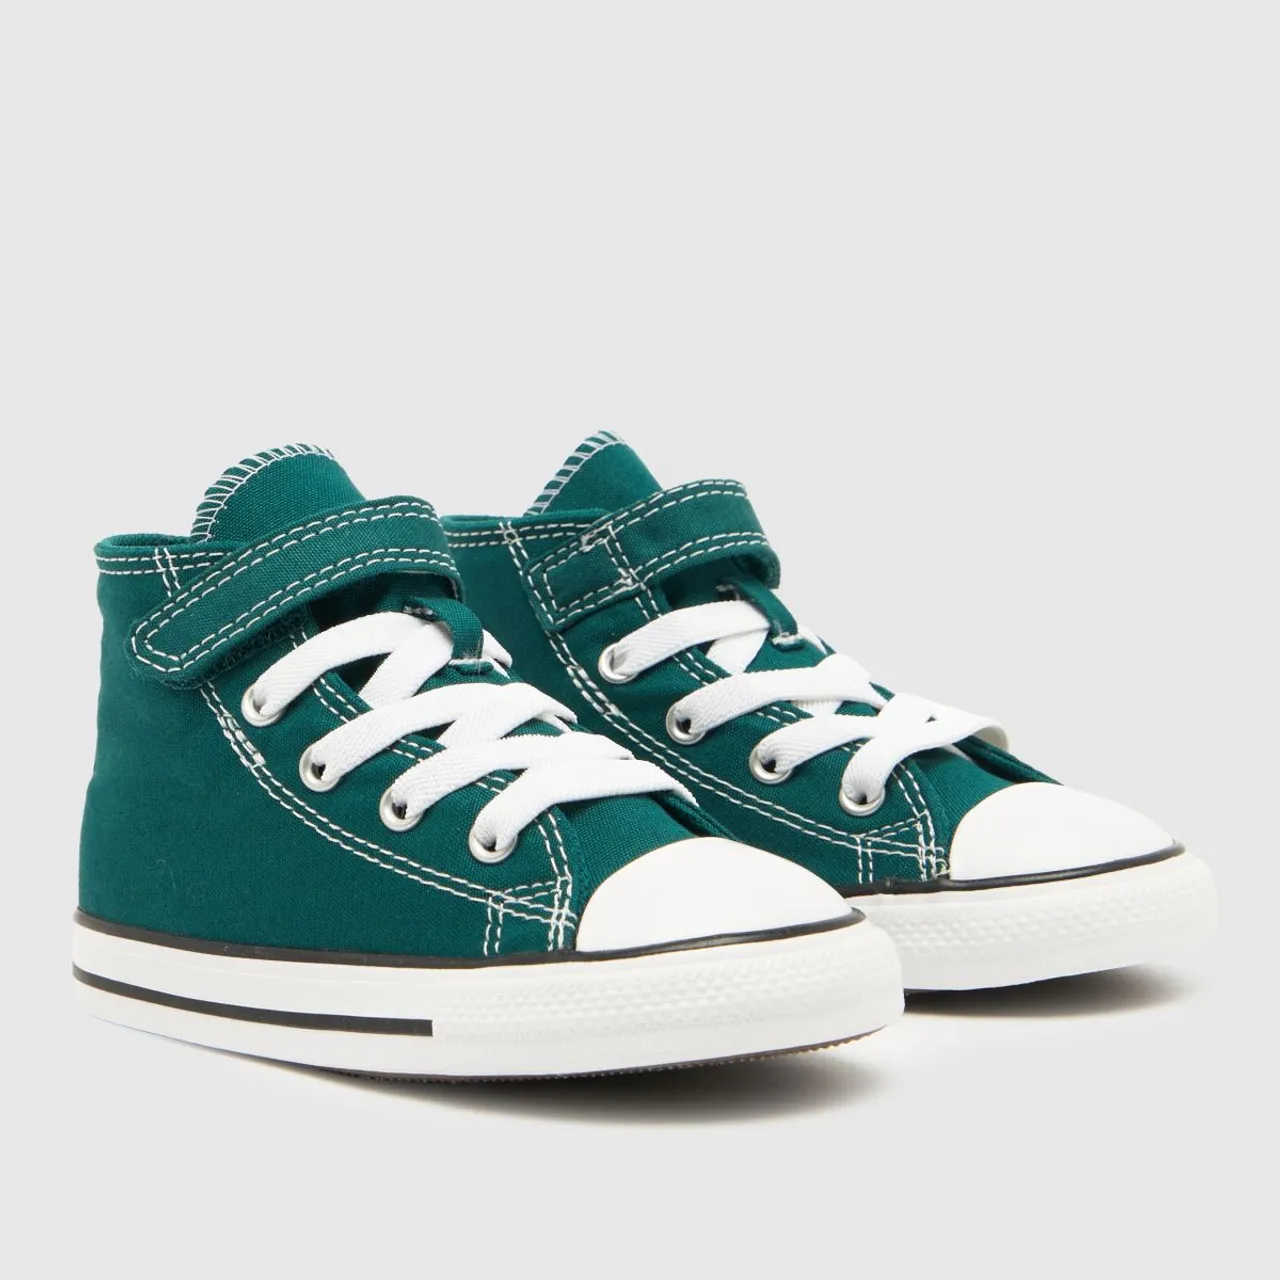 Converse Green All Star Hi 1v Boys Toddler Trainers